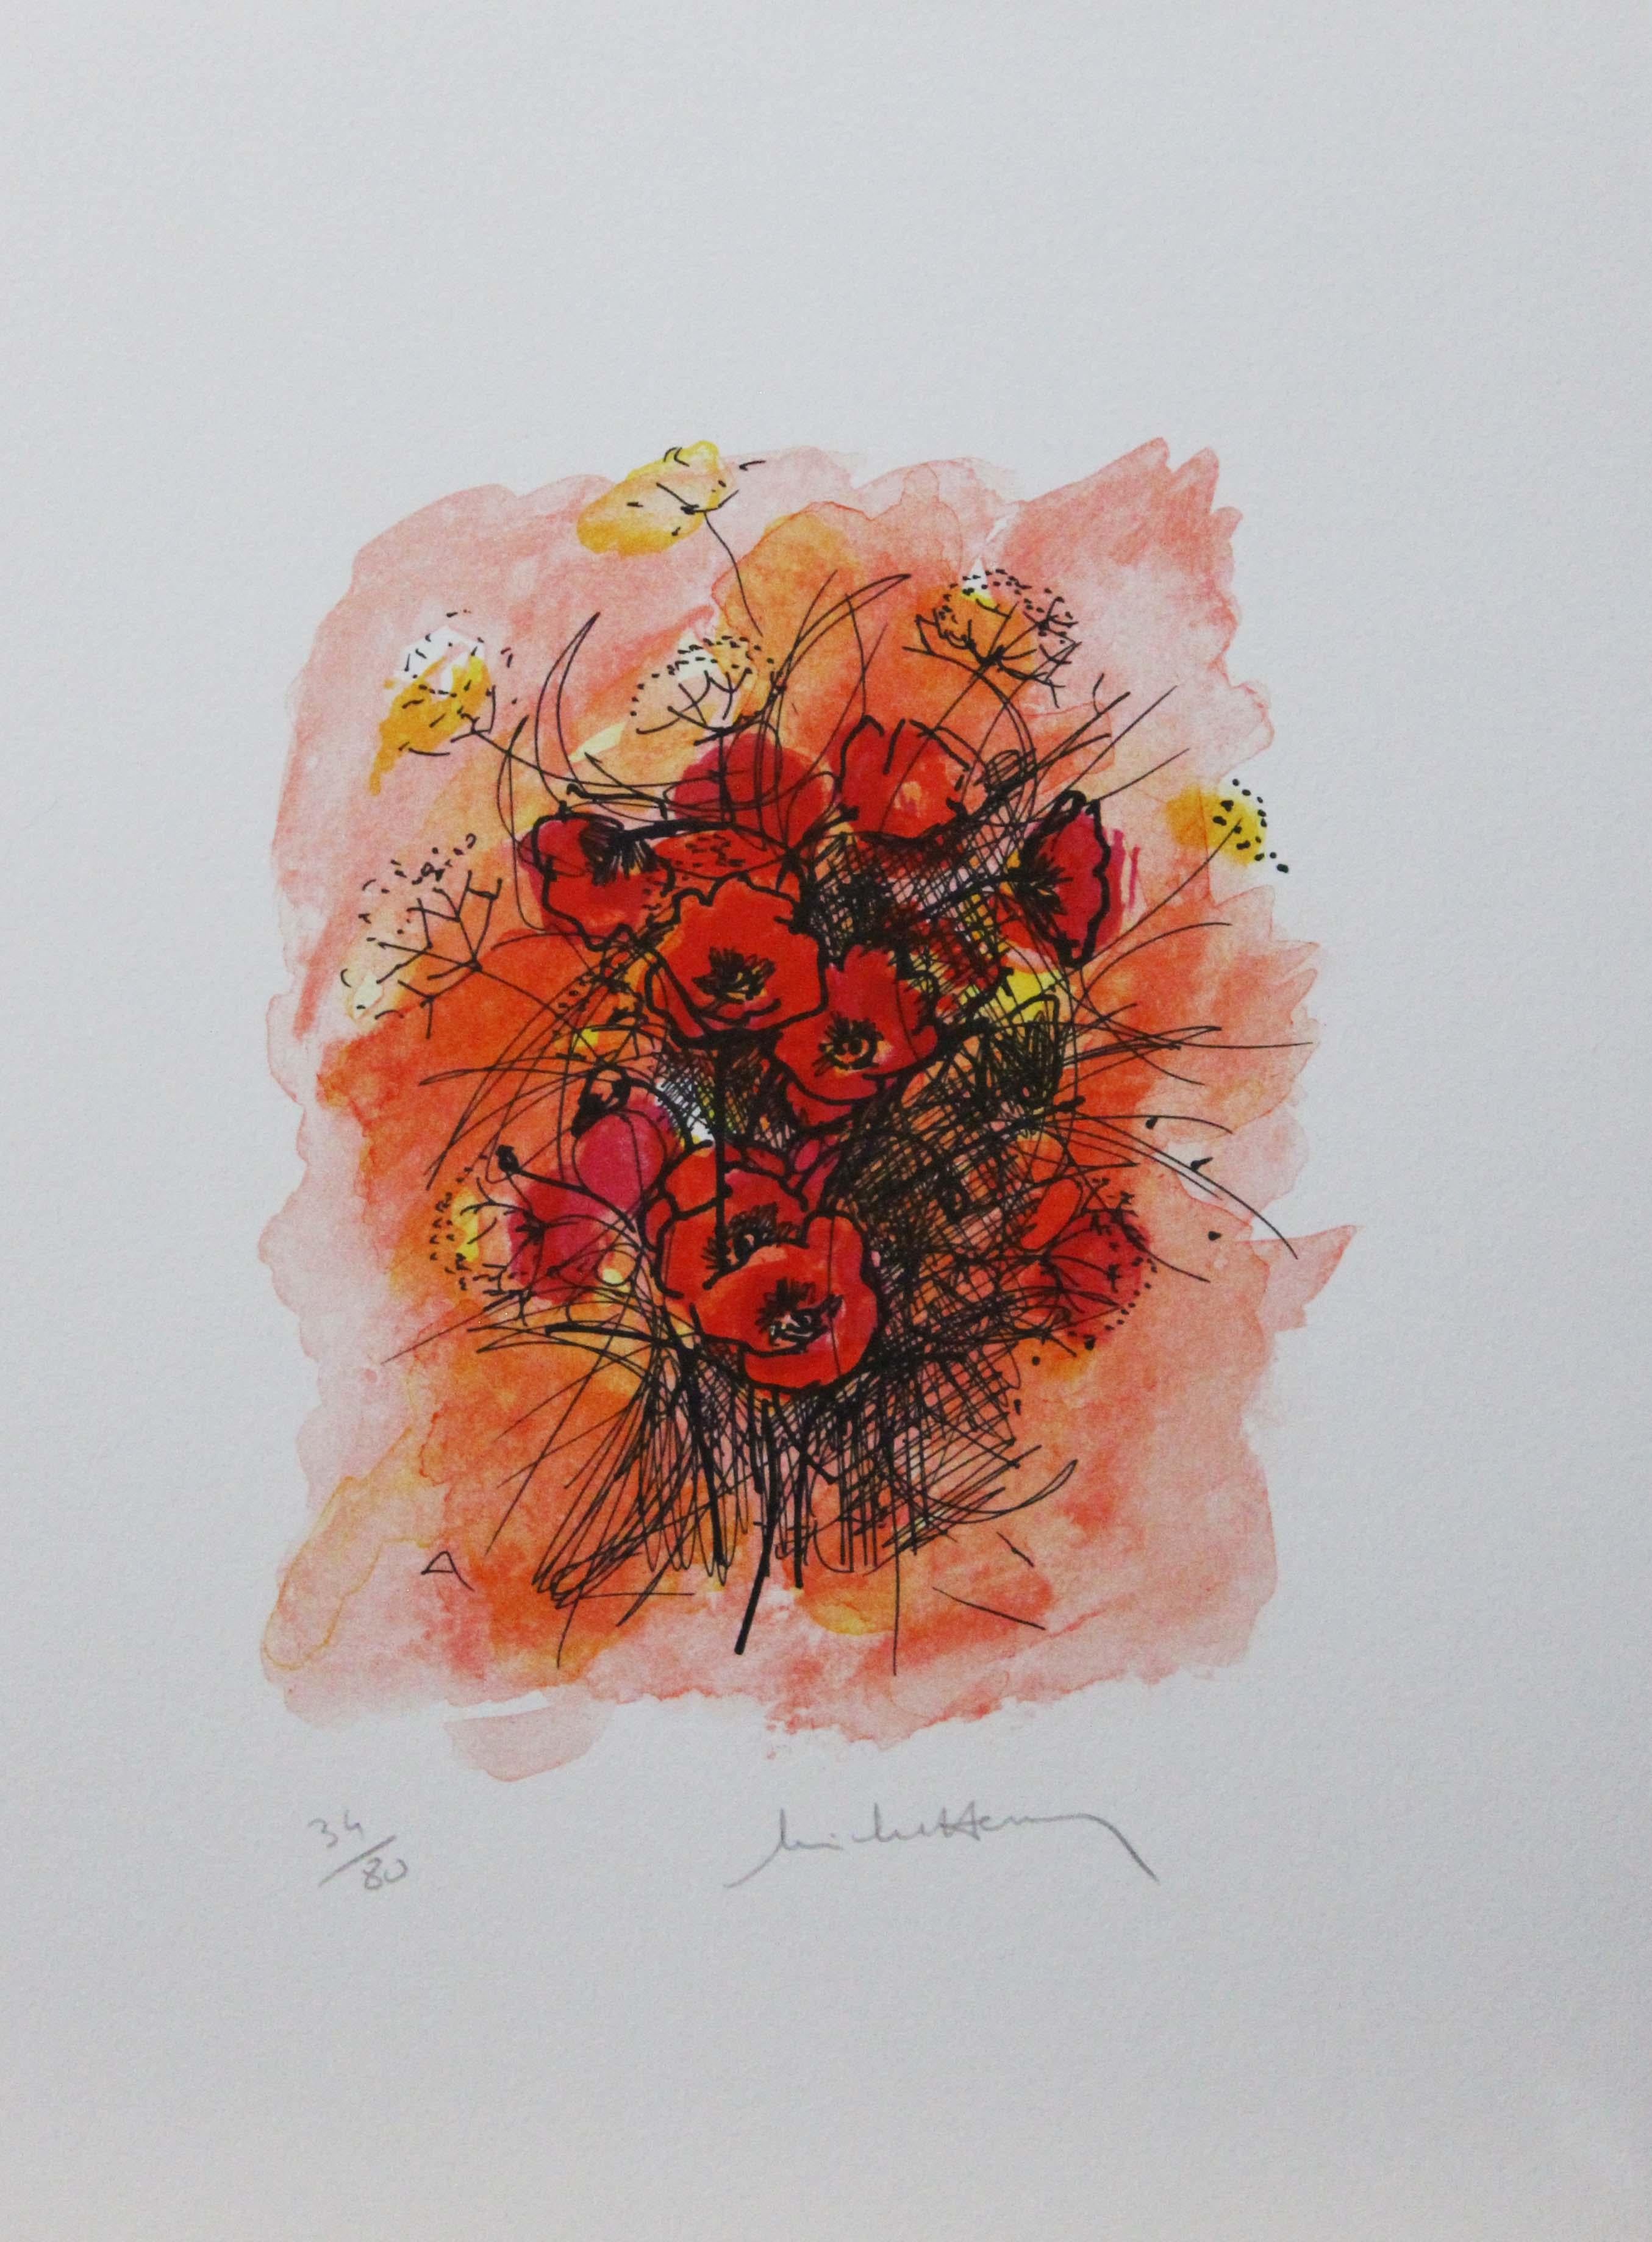 Unknown Still-Life Print - Les Fleurs #2-Limited Edition Print, Signed by Artist (Signature is Illegible) 